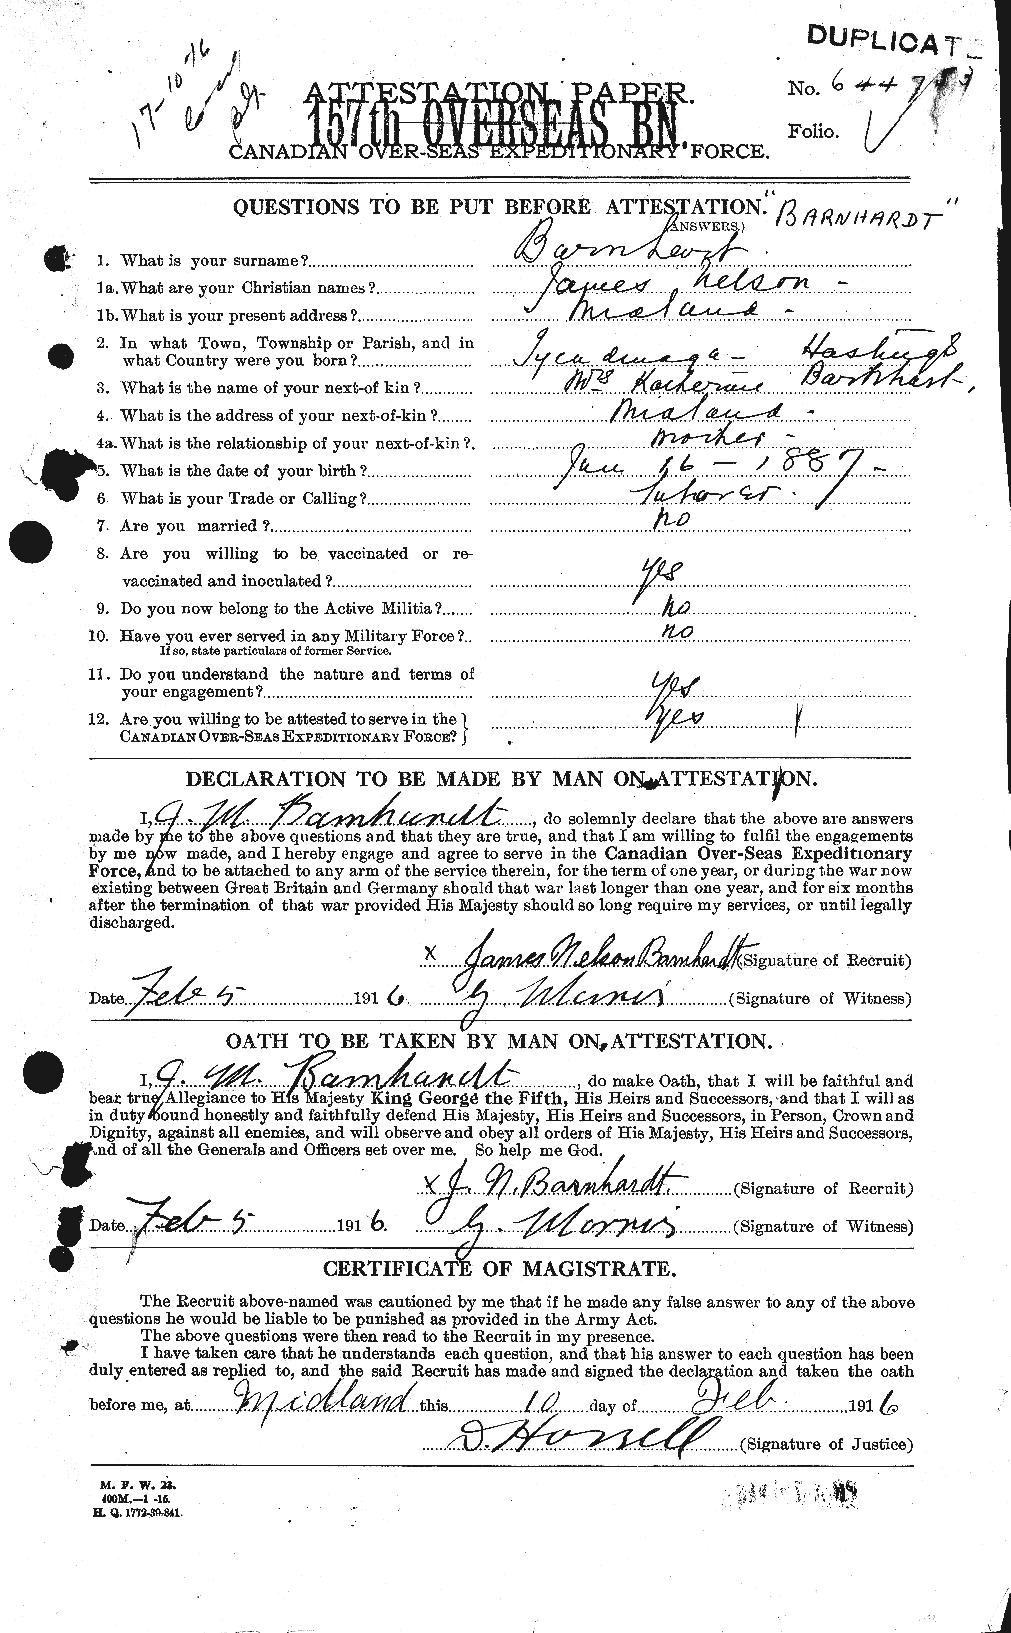 Personnel Records of the First World War - CEF 222824a